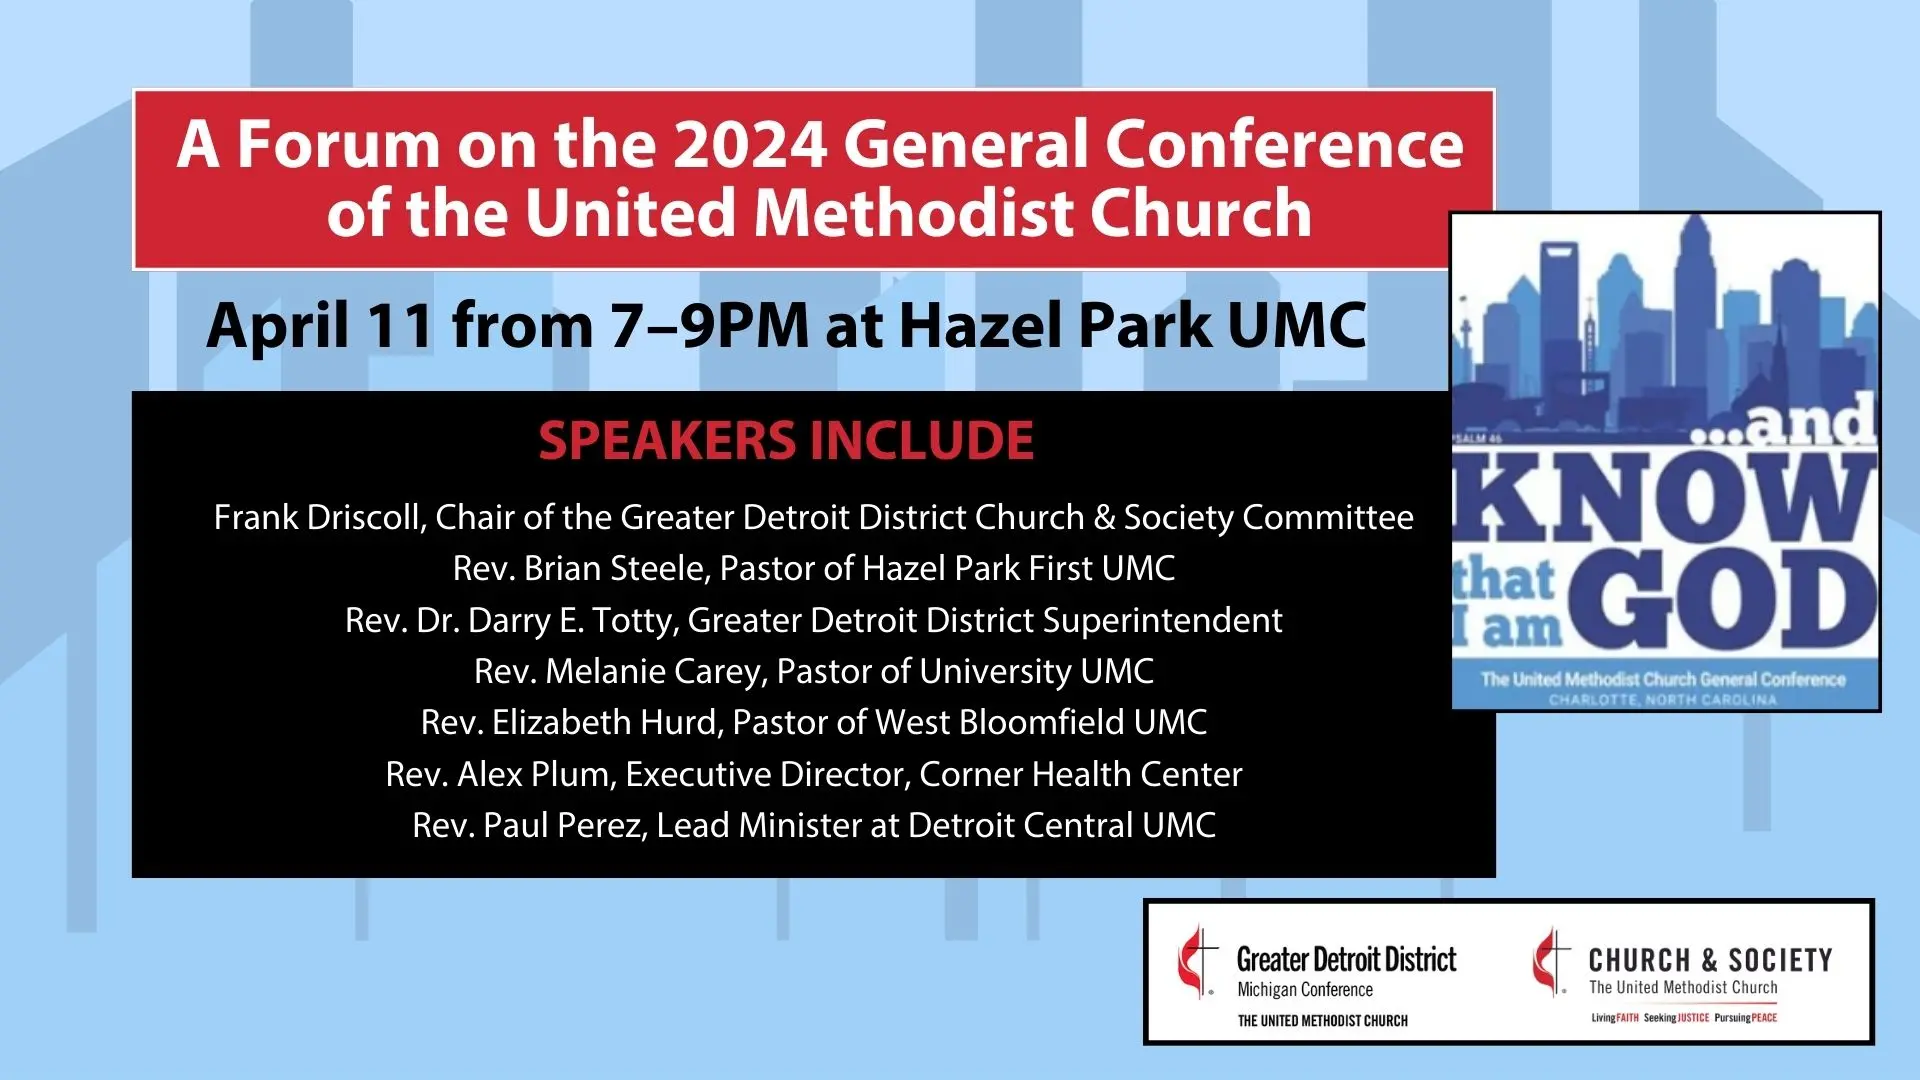 A Forum on the 2024 General Conference of the United Methodist Church